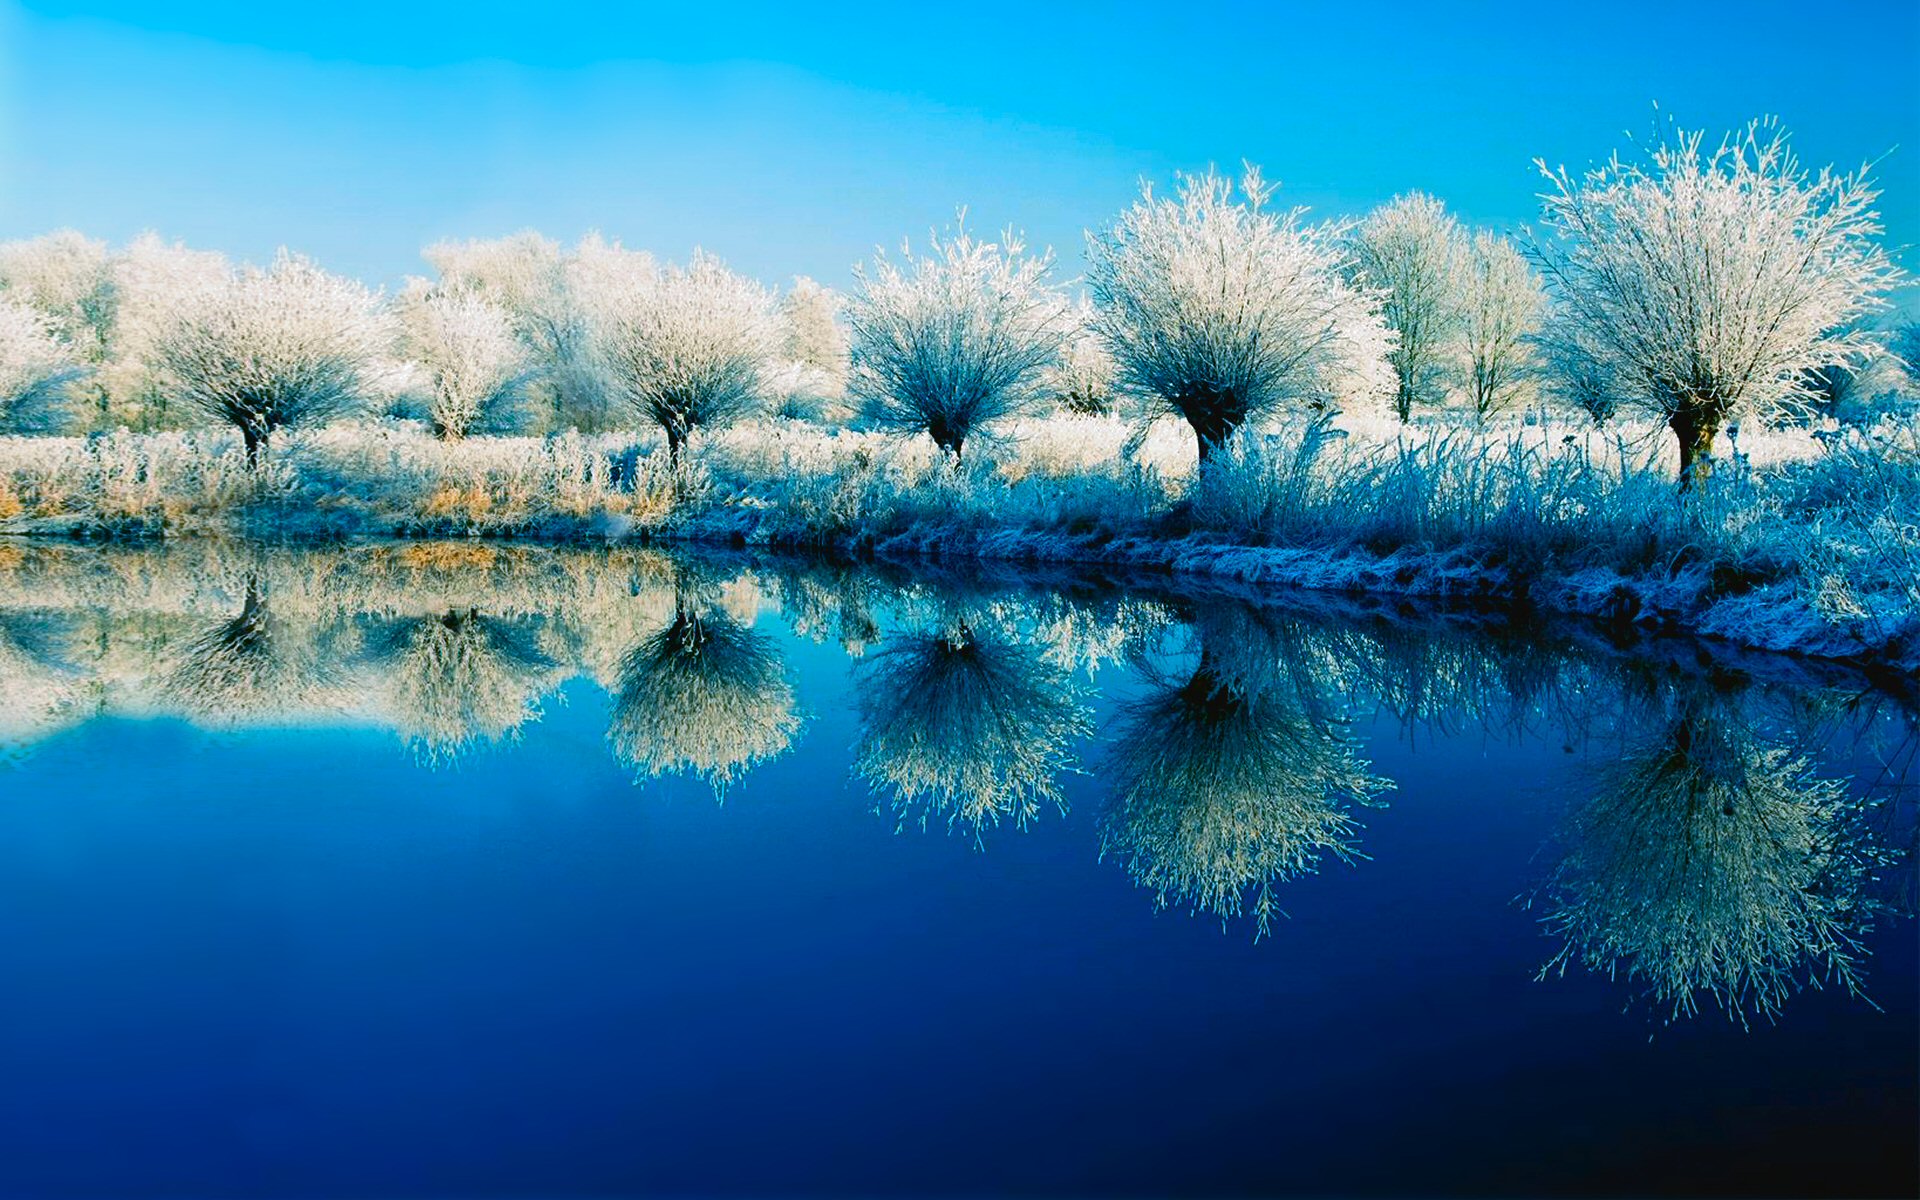 earth, winter, azure, blue, nature, reflection, snow, tree, turquoise